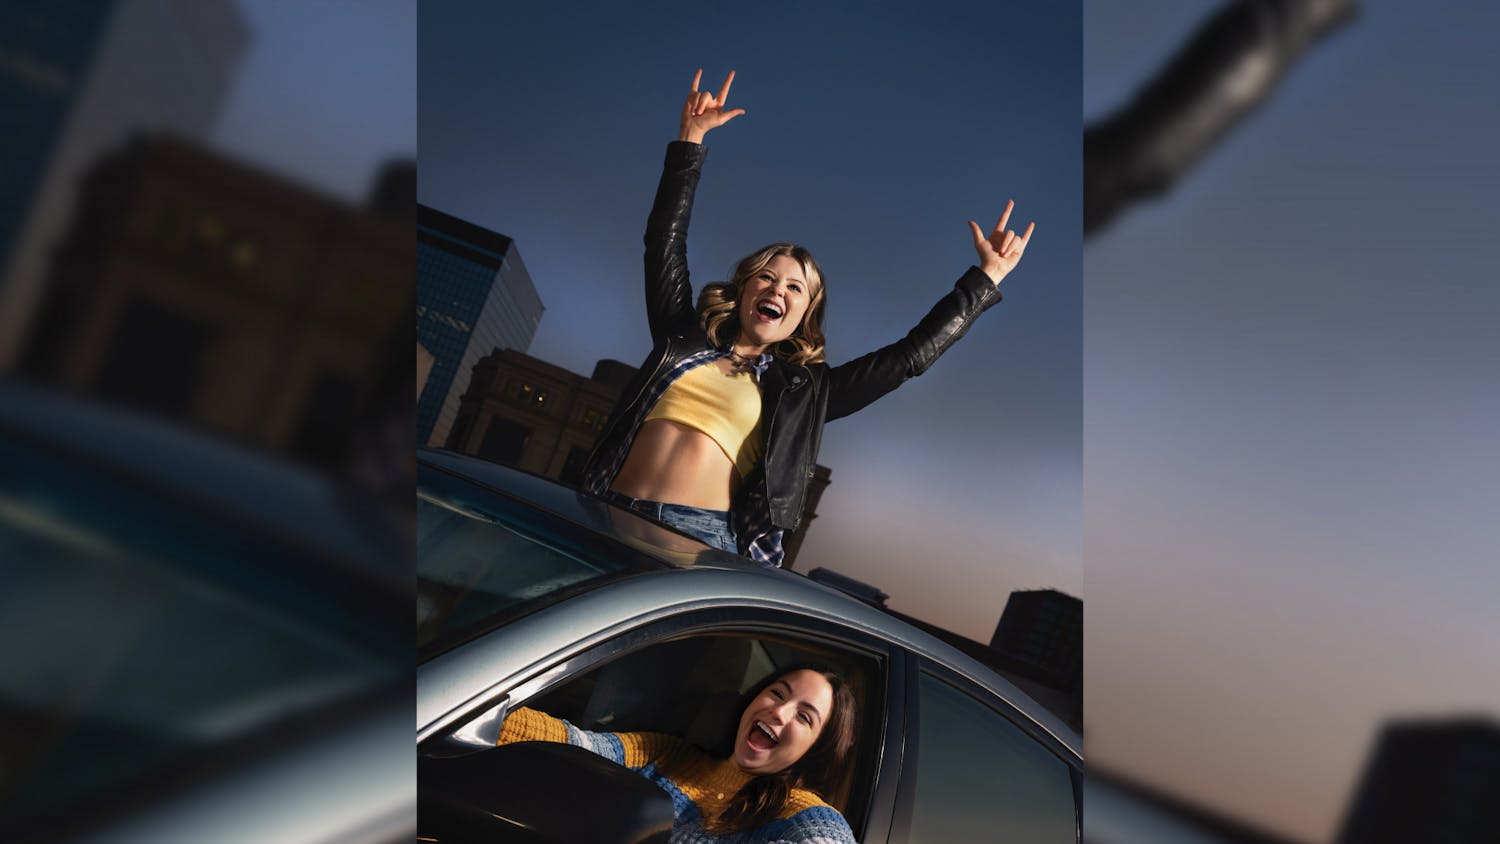 A promotional picture for "The Mad Ones" with performers Elise Heffner (top) and Lily Smith (bottom) driving around Columbia. "The Mad Ones" will be performed at Trustus Theatre every night from Feb. 24 to March 18 at 8 p.m., except for the performance on March 2, which will take place at 7 p.m.